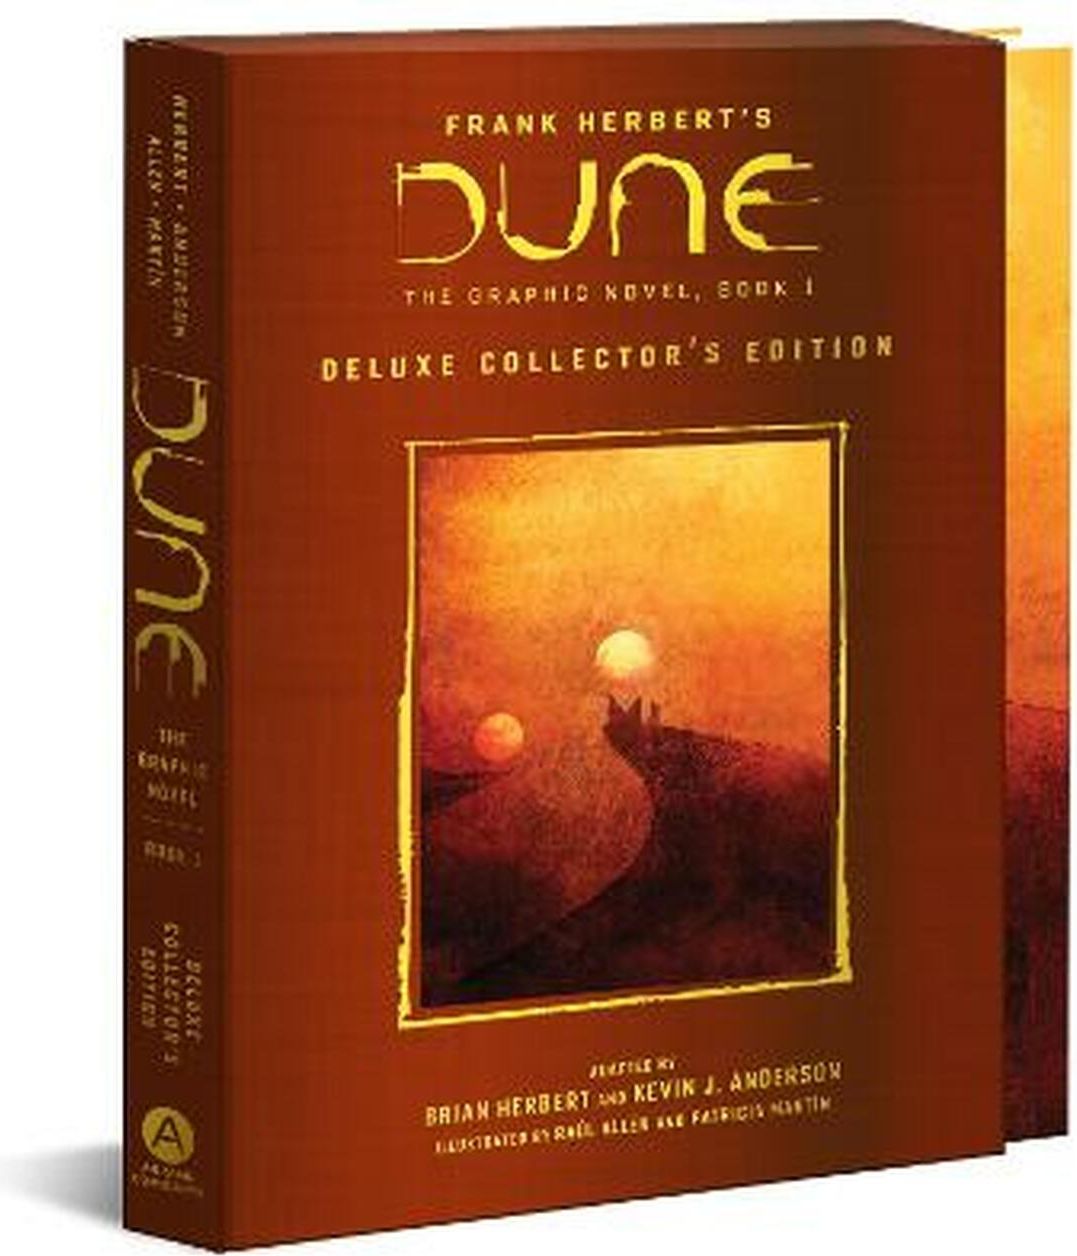 Abrams DUNE: The Graphic Novel, Book 1: Dune Deluxe Collector's Edition - obrázek 1